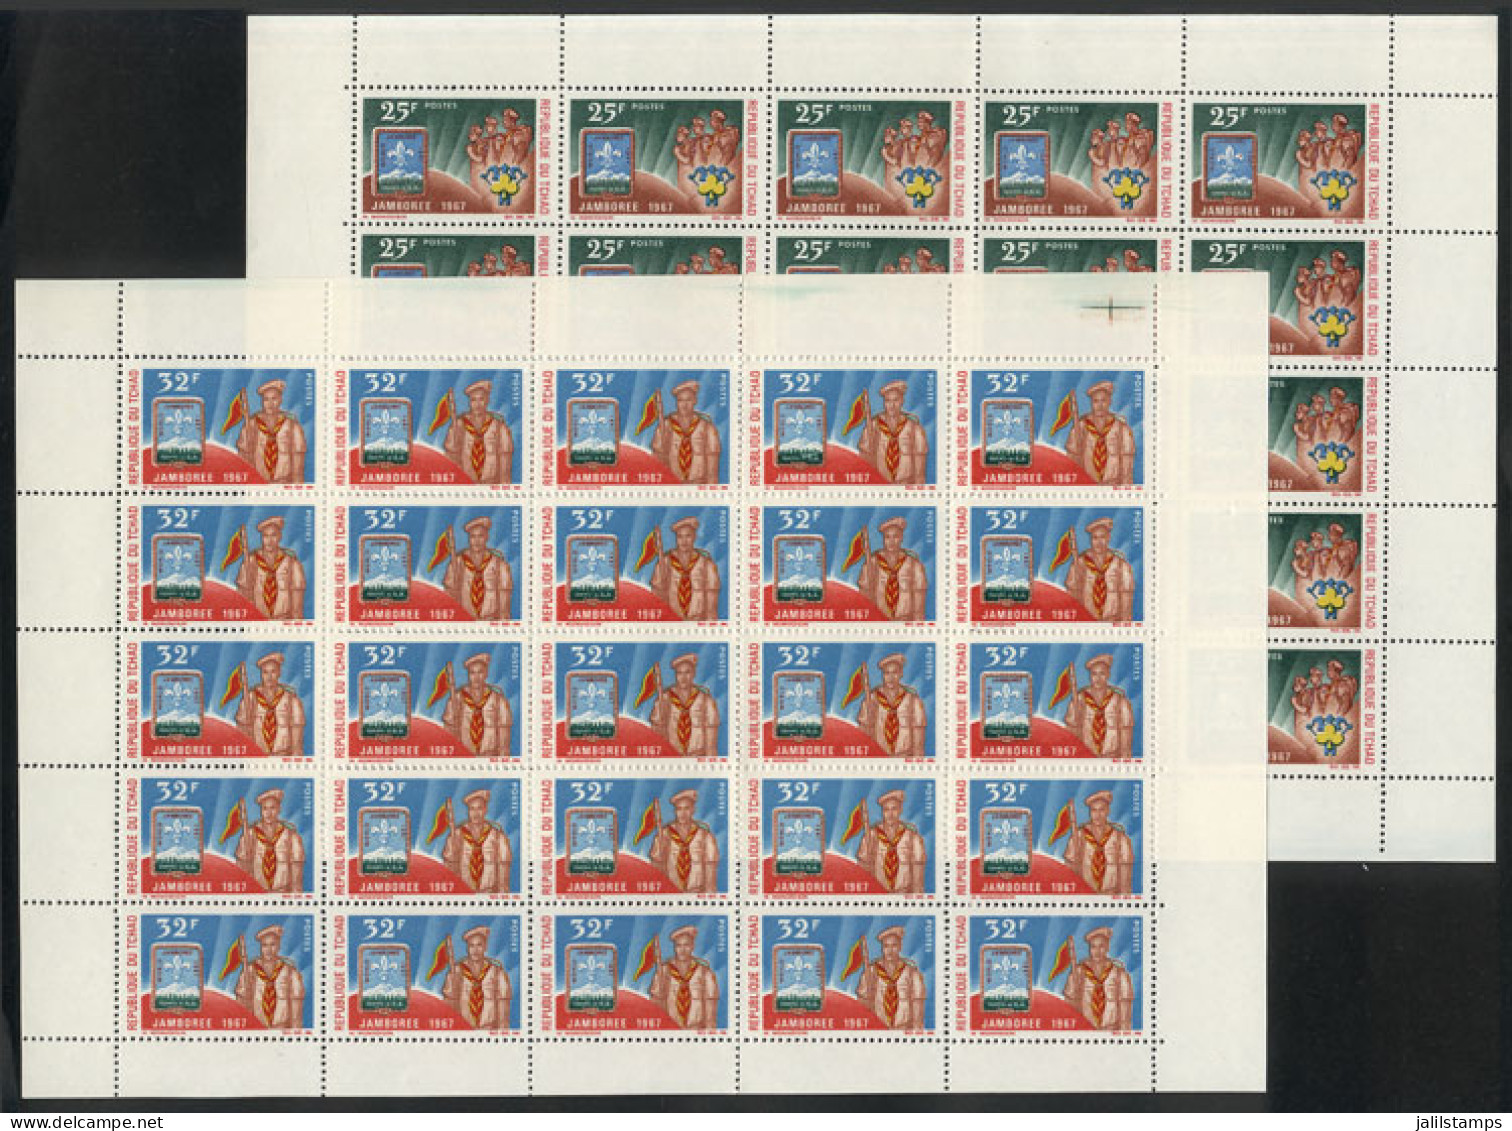 CHAD: Sc.144/145, 1967 Scouts, Cmpl. Set Of 2 Values In Sheets Of 25, MNH, VF Quality! - Ciad (1960-...)